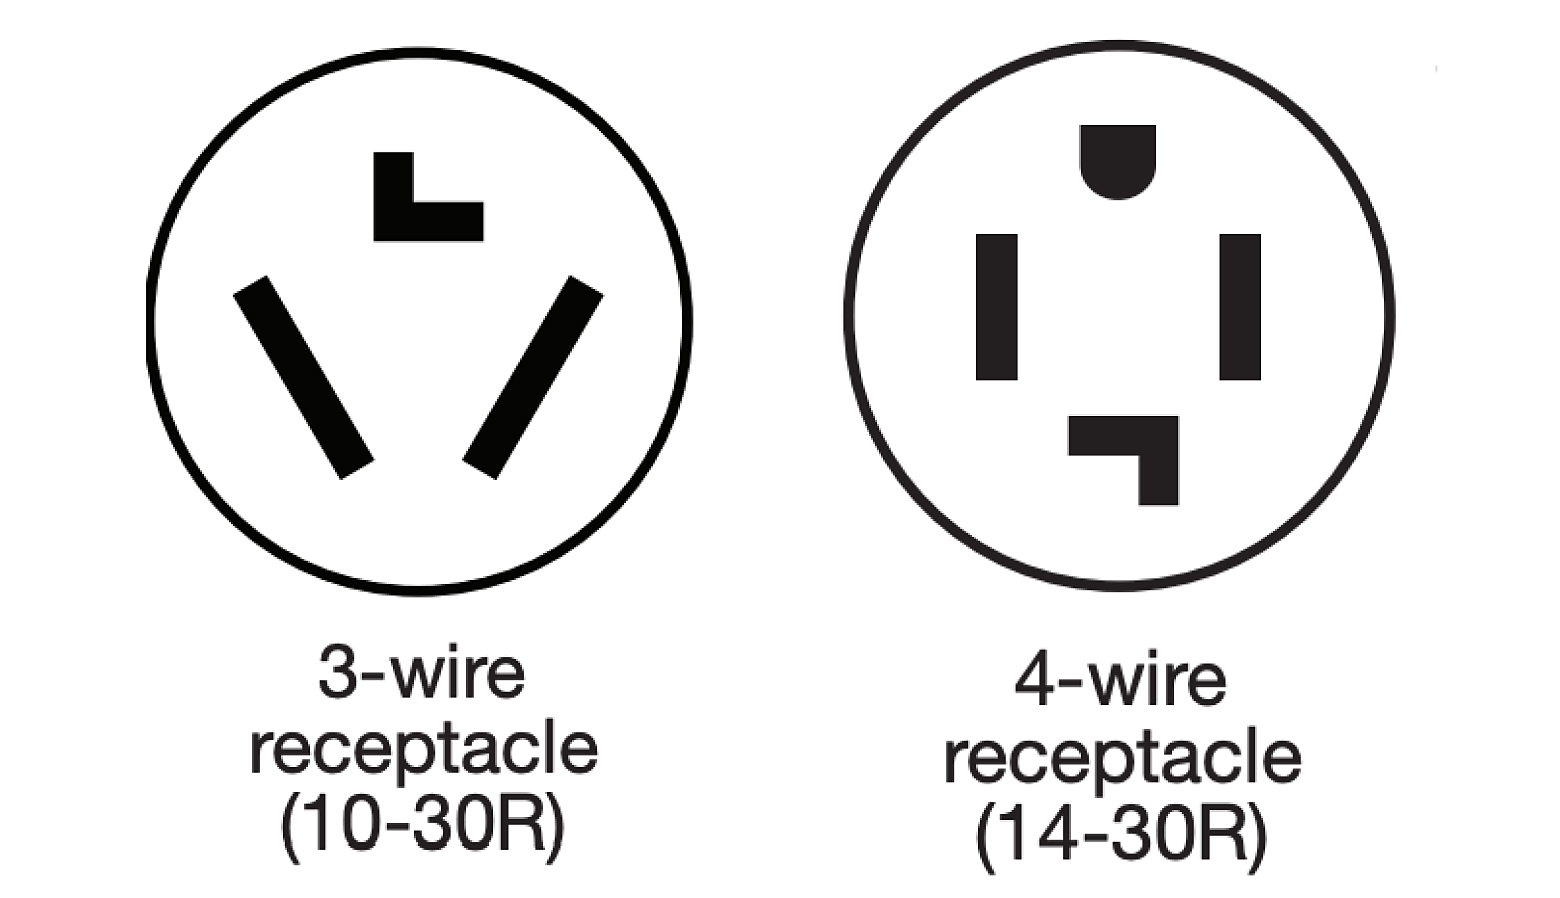 A diagram showing a 3 wire receptacle and a 4 wire receptacle.